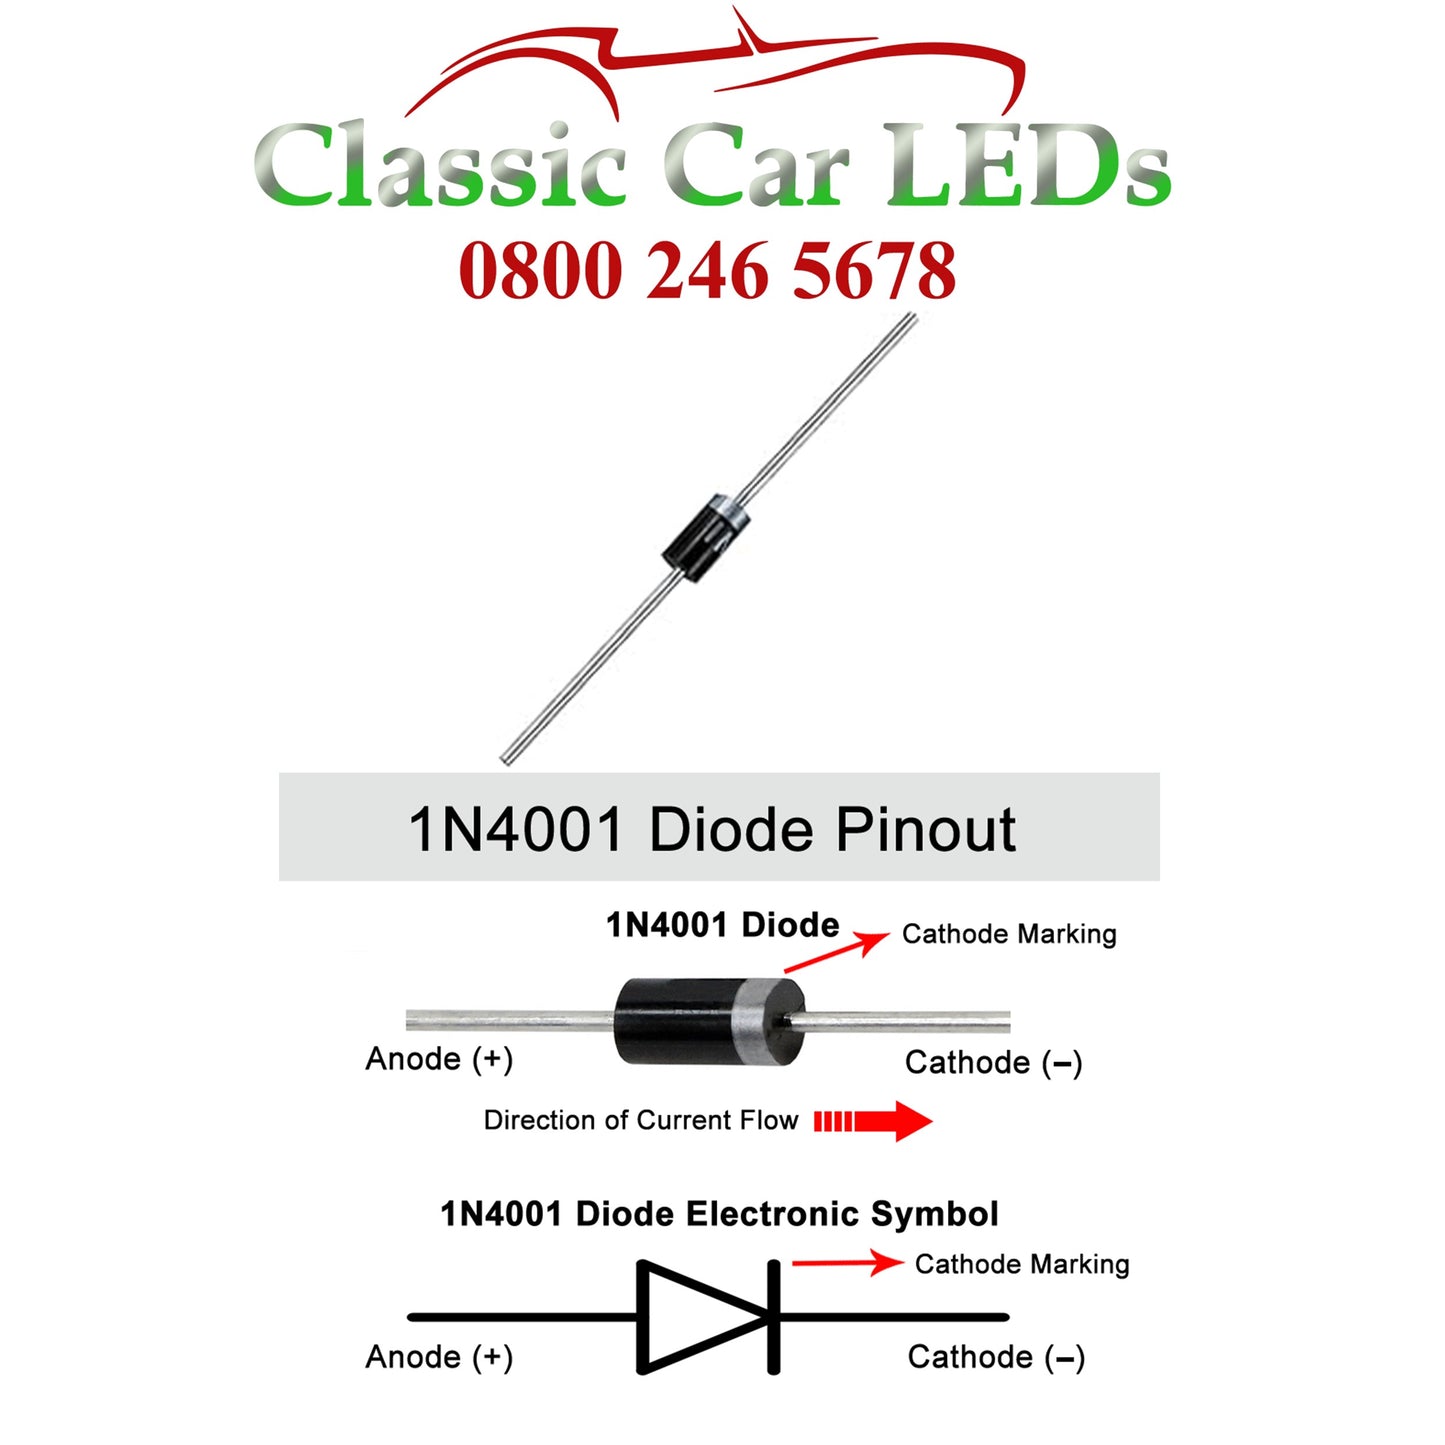 1N4001 Rectifier Diode 1A - Blocking diode - stops reverse current